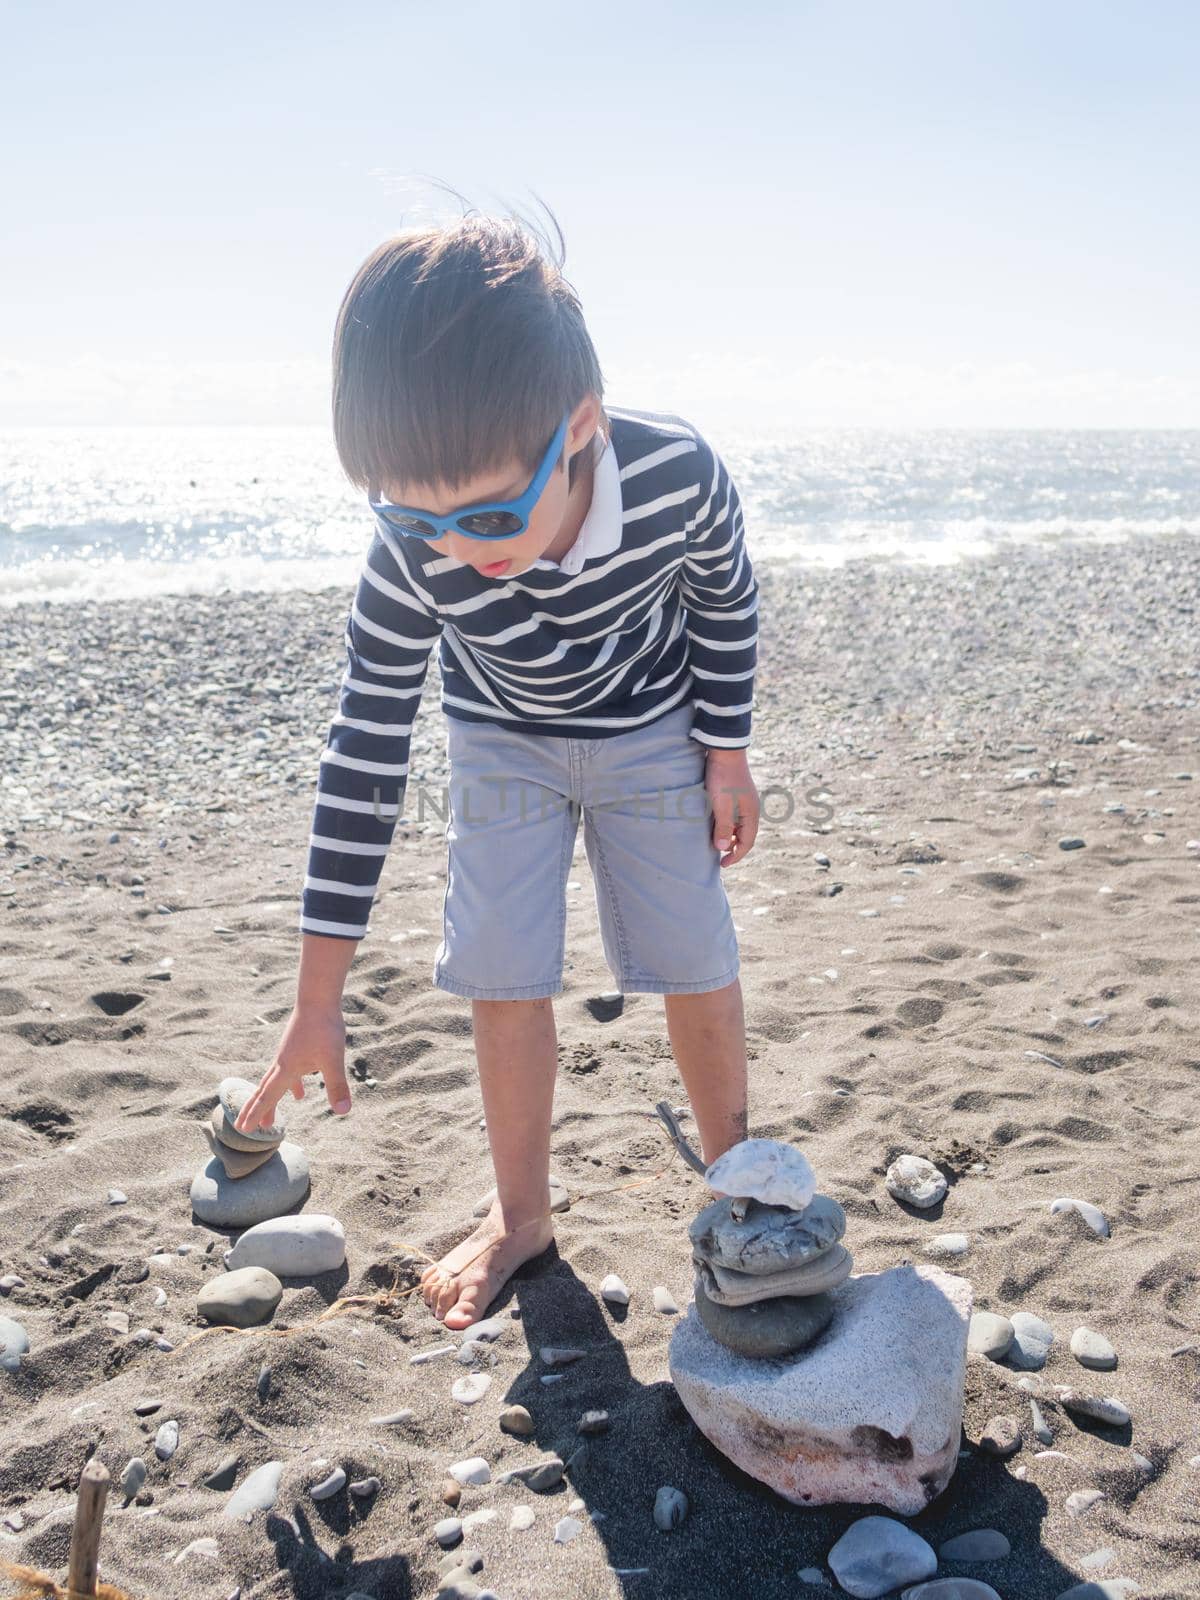 Little boy is building pyramid with stones and driftwood on pebble beach. Vacation on seaside. Exploring nature in childhood.